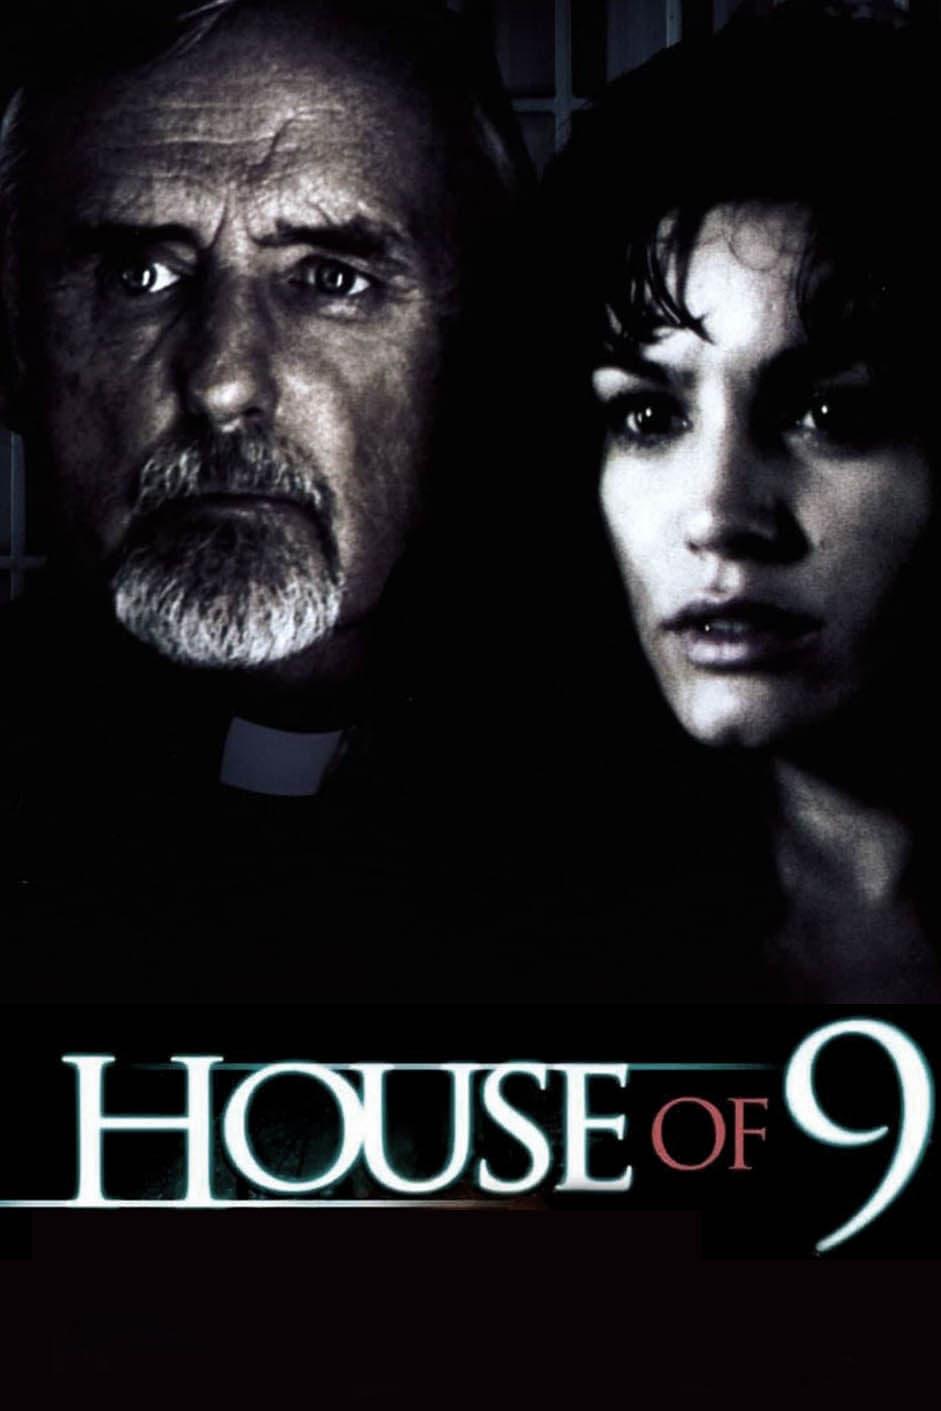 House of 9 poster